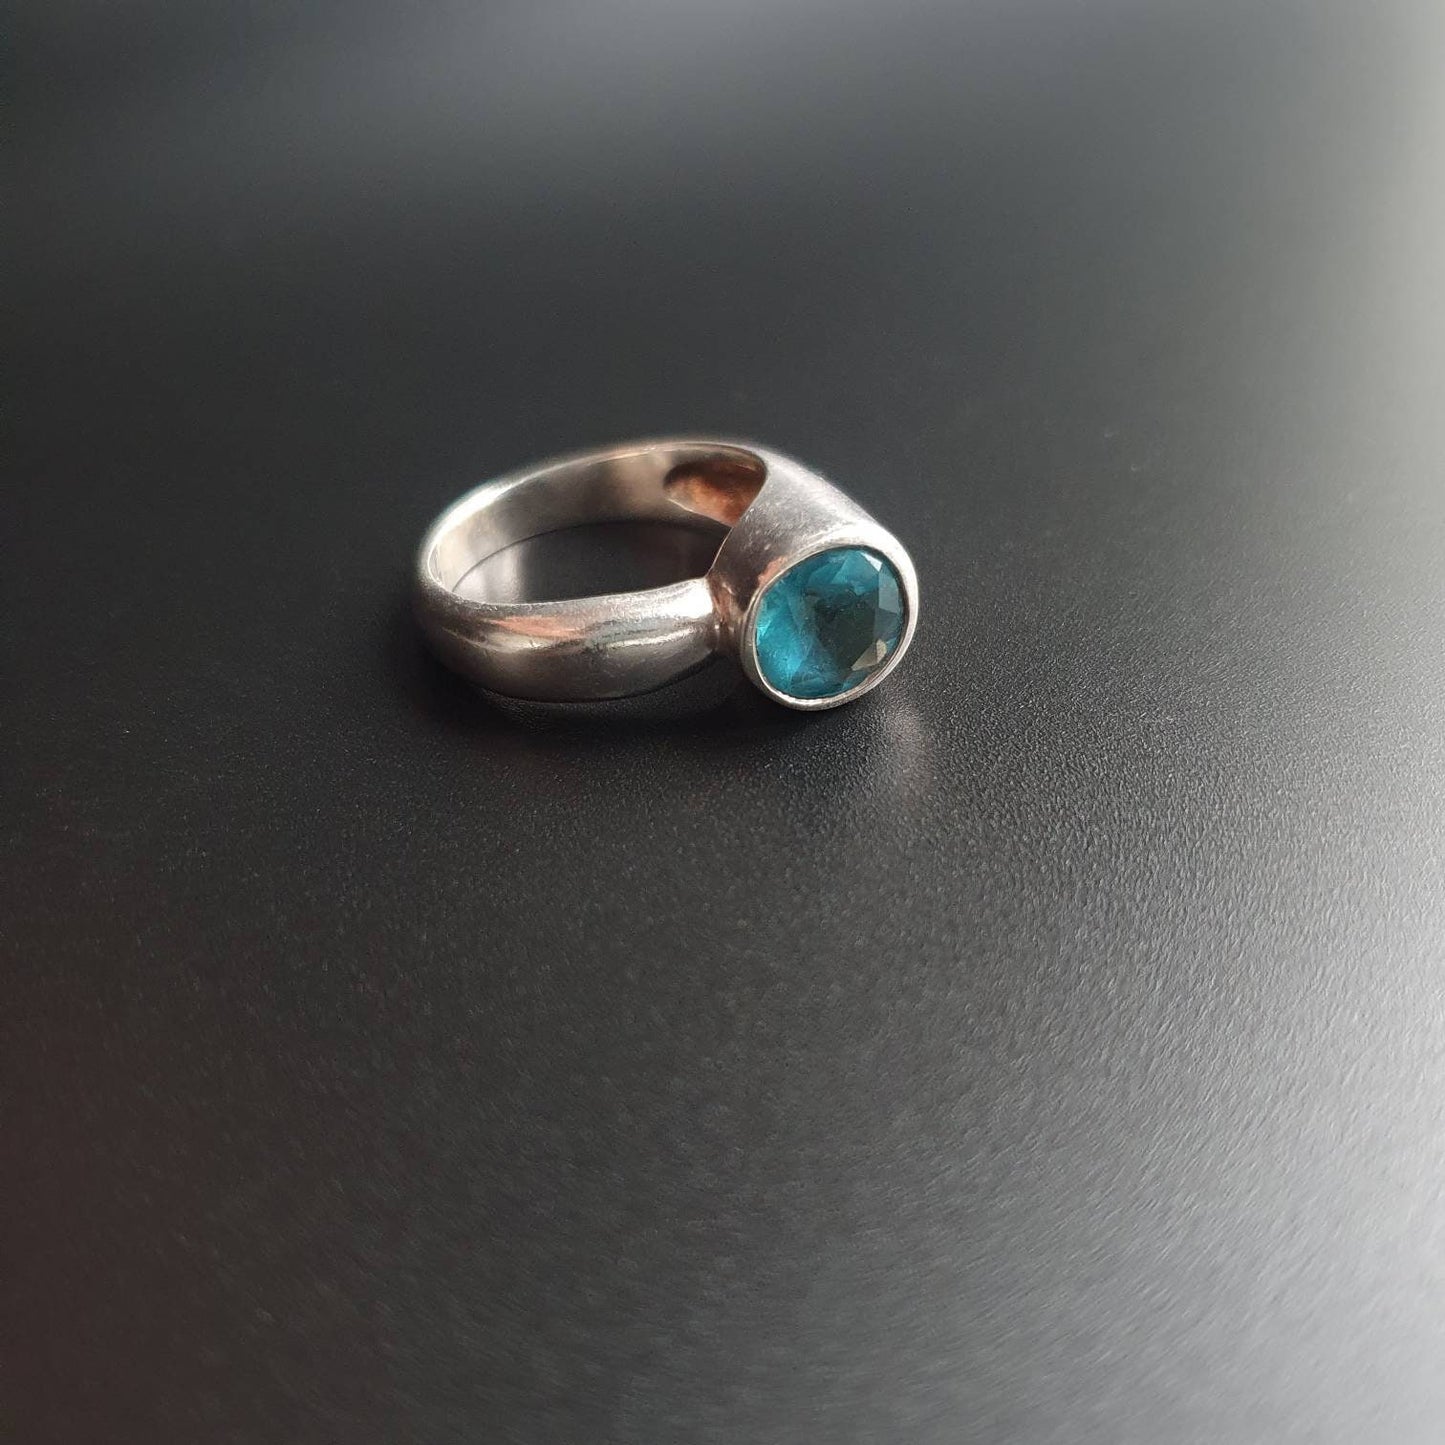 Silver ring, statement ring, aquamarine gemstone, ring, sterling, jewelry, gifts, horn, unique jewelry, blue gemstone, silver jewellery,925